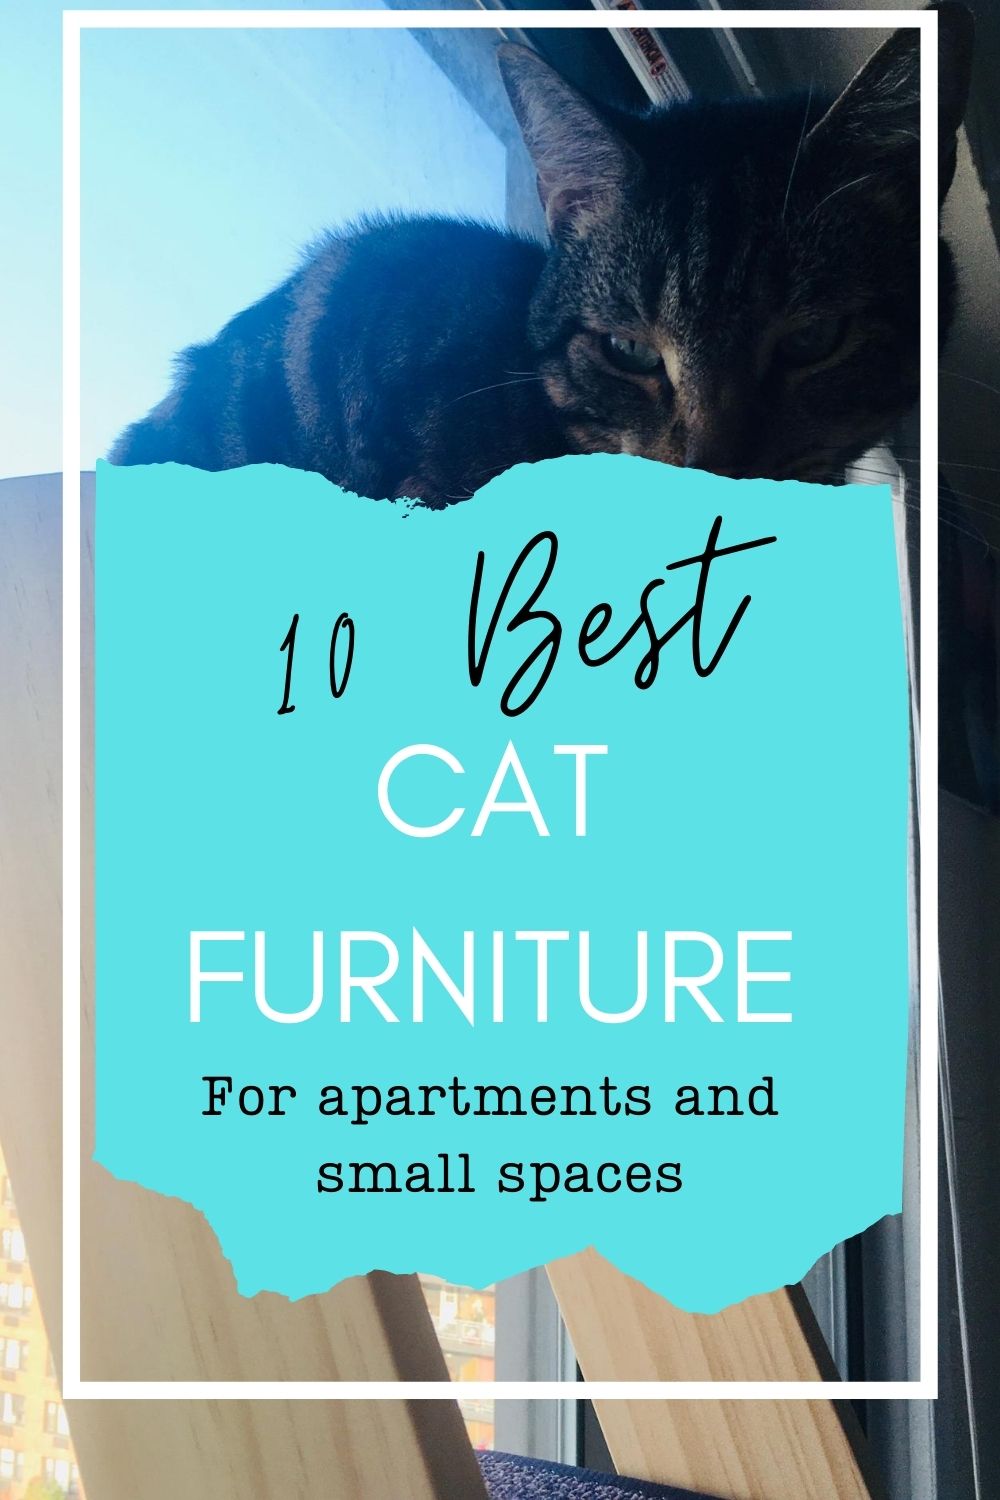 10 best cat furniture for small spaces pin image